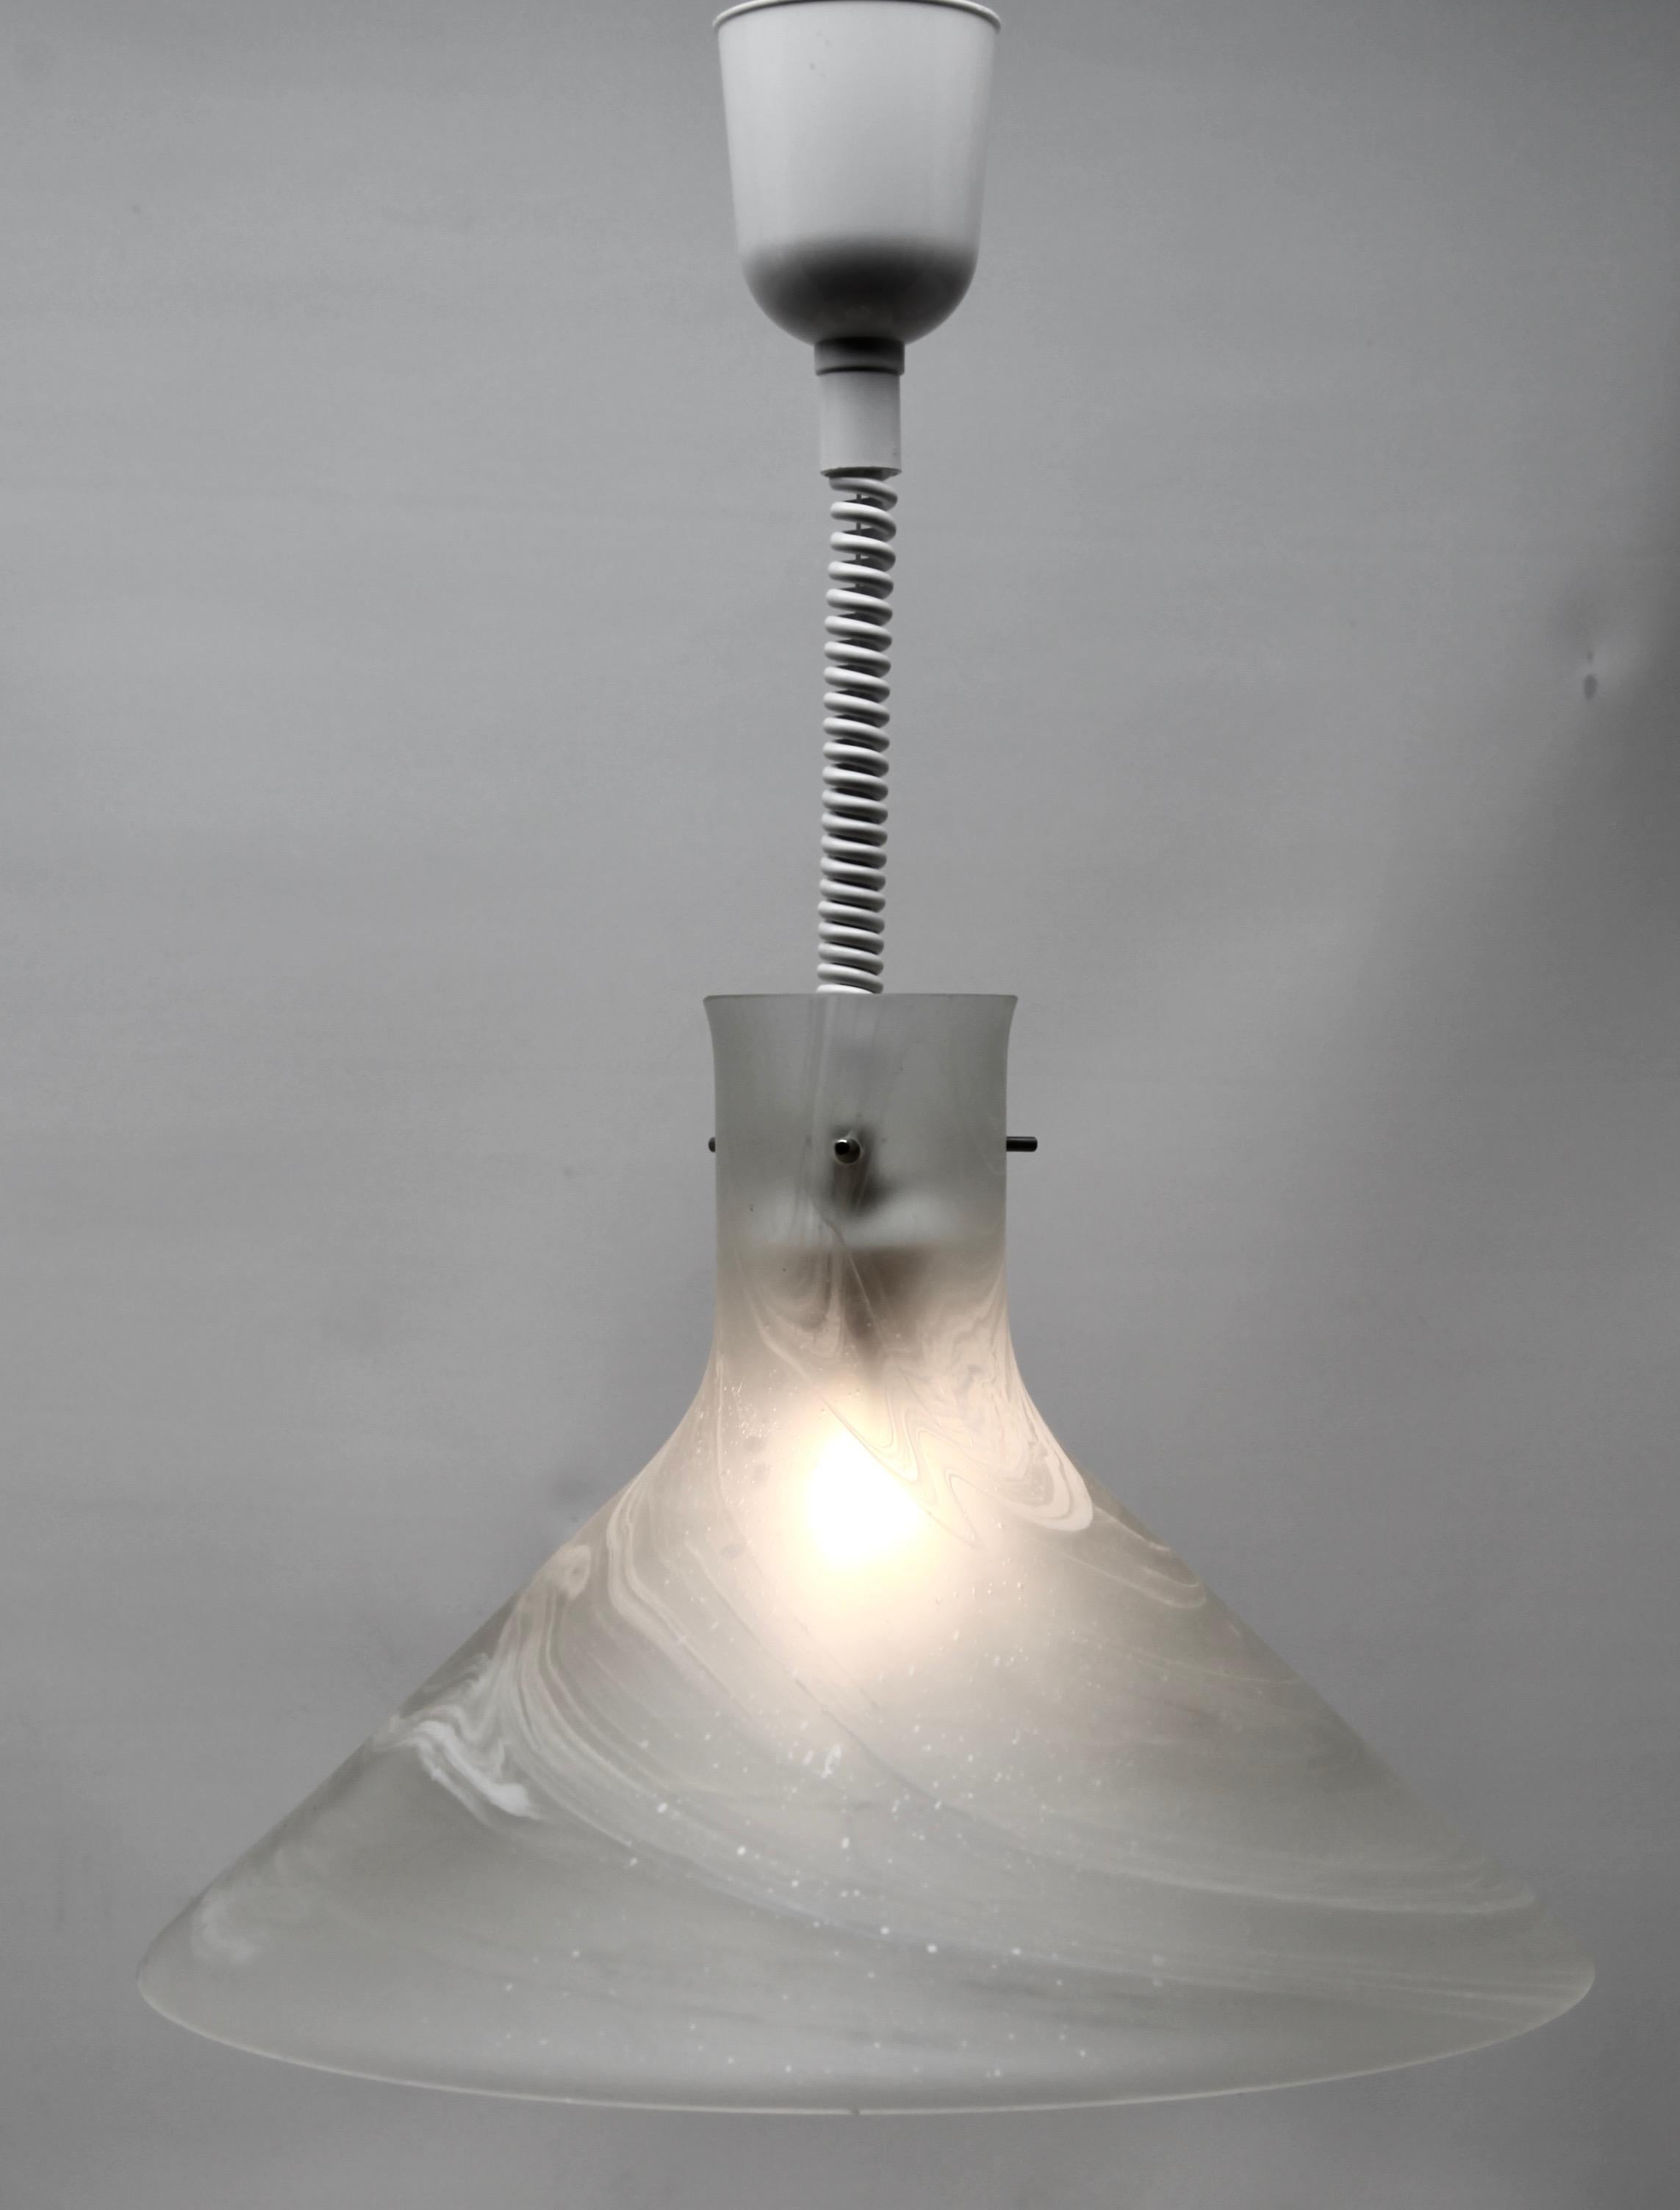 Vintage pendant light by Peill & Putzler, Germany. This central pendant light is crafted from heavy hand blown glass with dramatic swirling clouds of grey and white creating a brutalist feel, and has the trademark P&P peg mounting to secure the